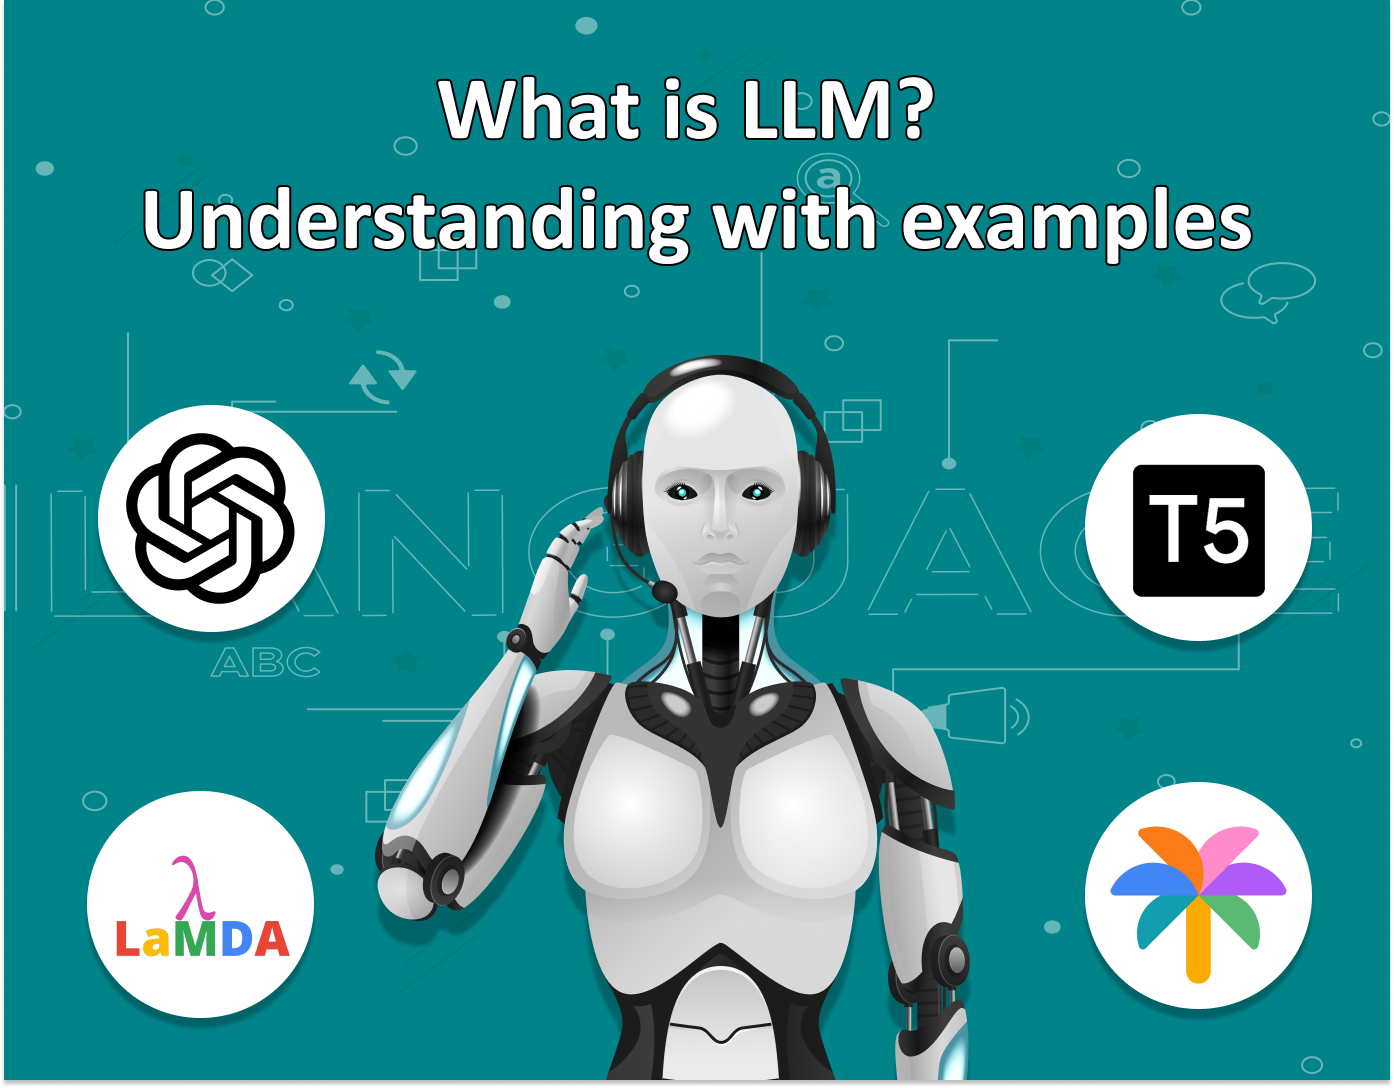 Thumbnail representing a blog post about Large Language Models (LLMs). Features icons denoting various LLM tasks like translation, text generation, and sentiment analysis.